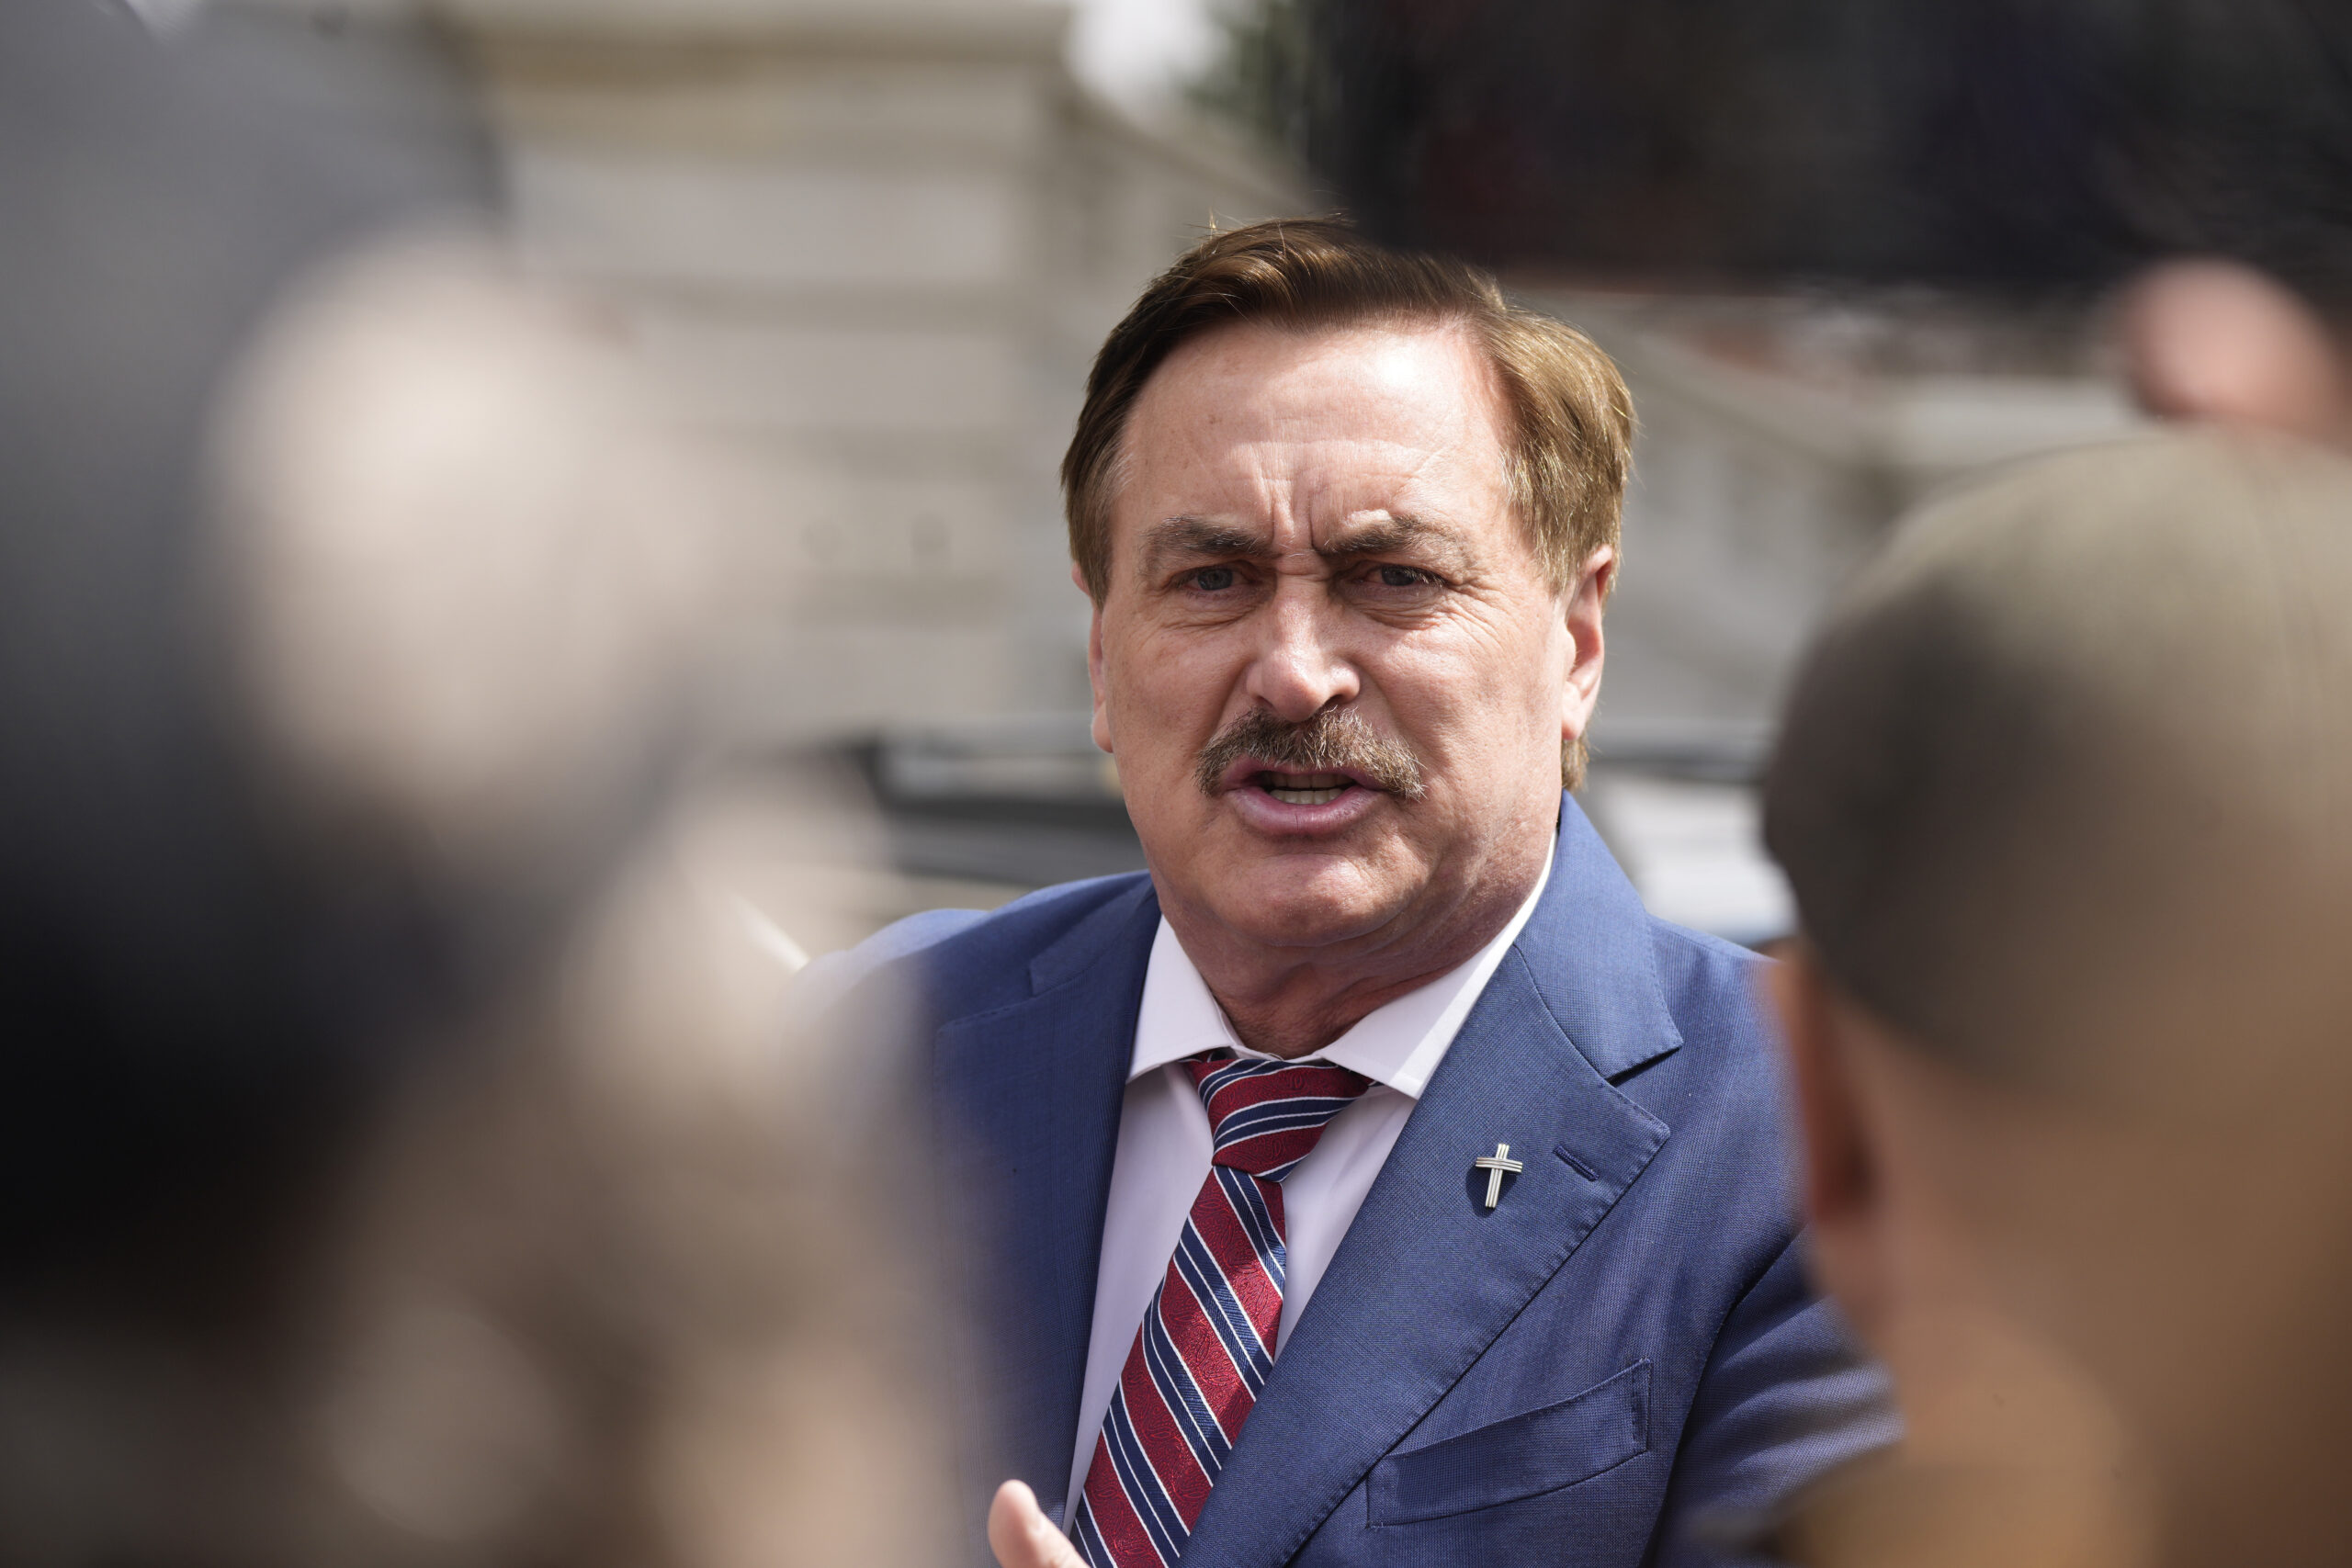 Mike Lindell, chief executive officer of MyPillow, talks to reporters before attending a rally outside the State Capitol, April 5, 2022, in downtown Denver. Lindell was banned from Twitter for a second time after attempting to use a new account to access the social media platform. Lindell set up a new account on Twitter on Sunday, May 1, 2022 under @MikeJLindell. But the account was quickly suspended. (AP Photo/David Zalubowski)